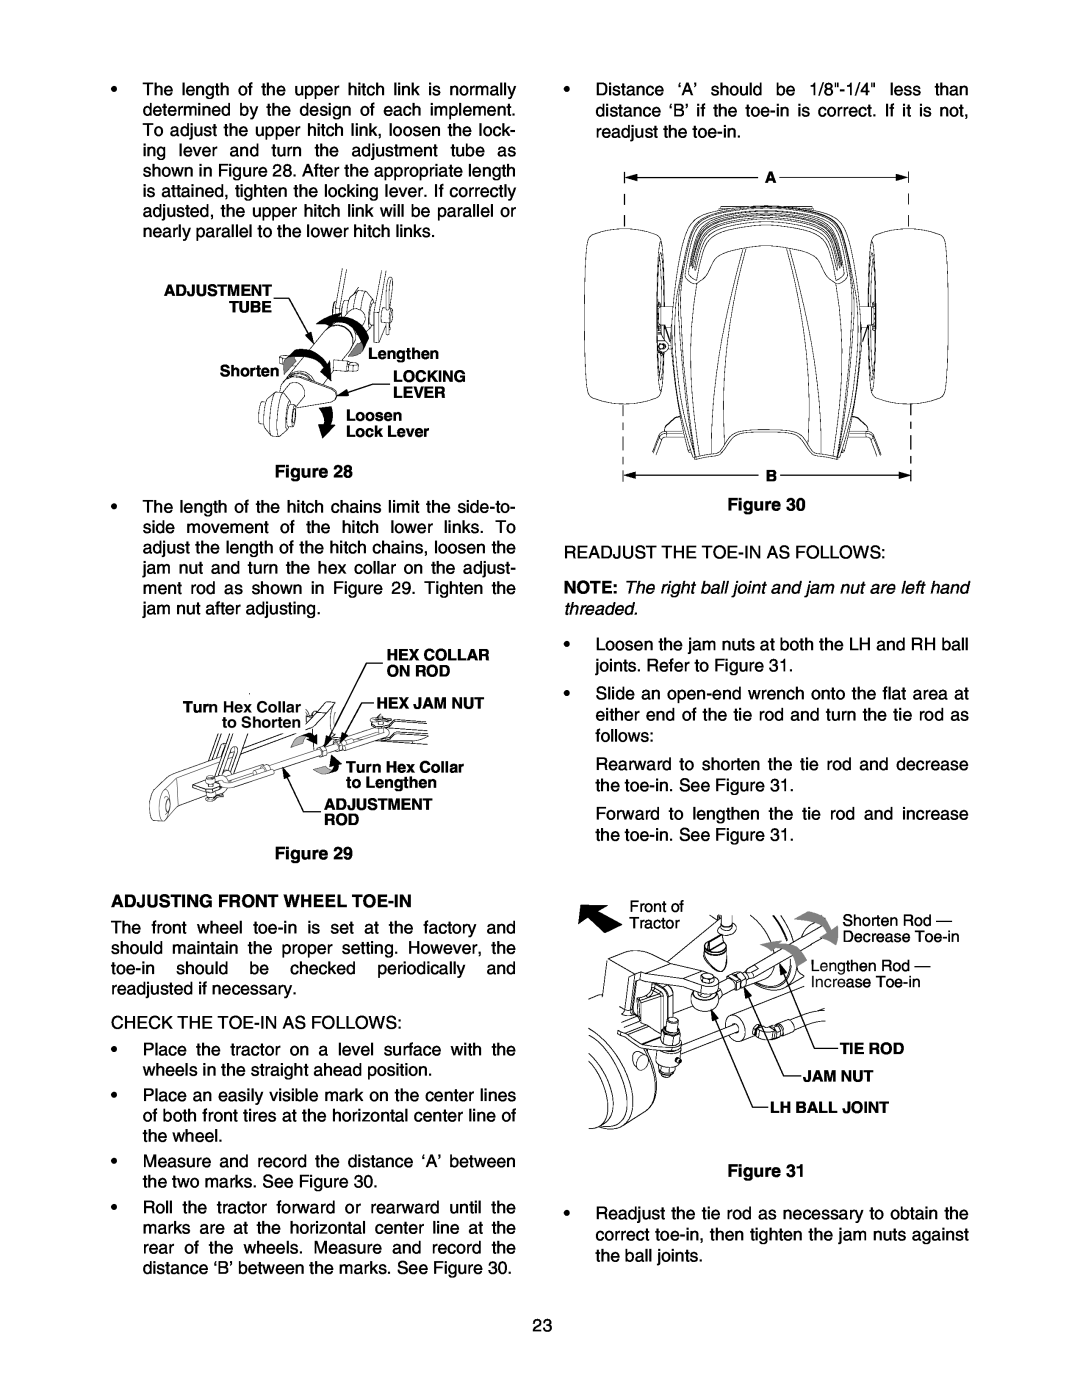 Cub Cadet 5254 manual Adjusting Front Wheel Toe-In, NOTE The right ball joint and jam nut are left hand threaded 